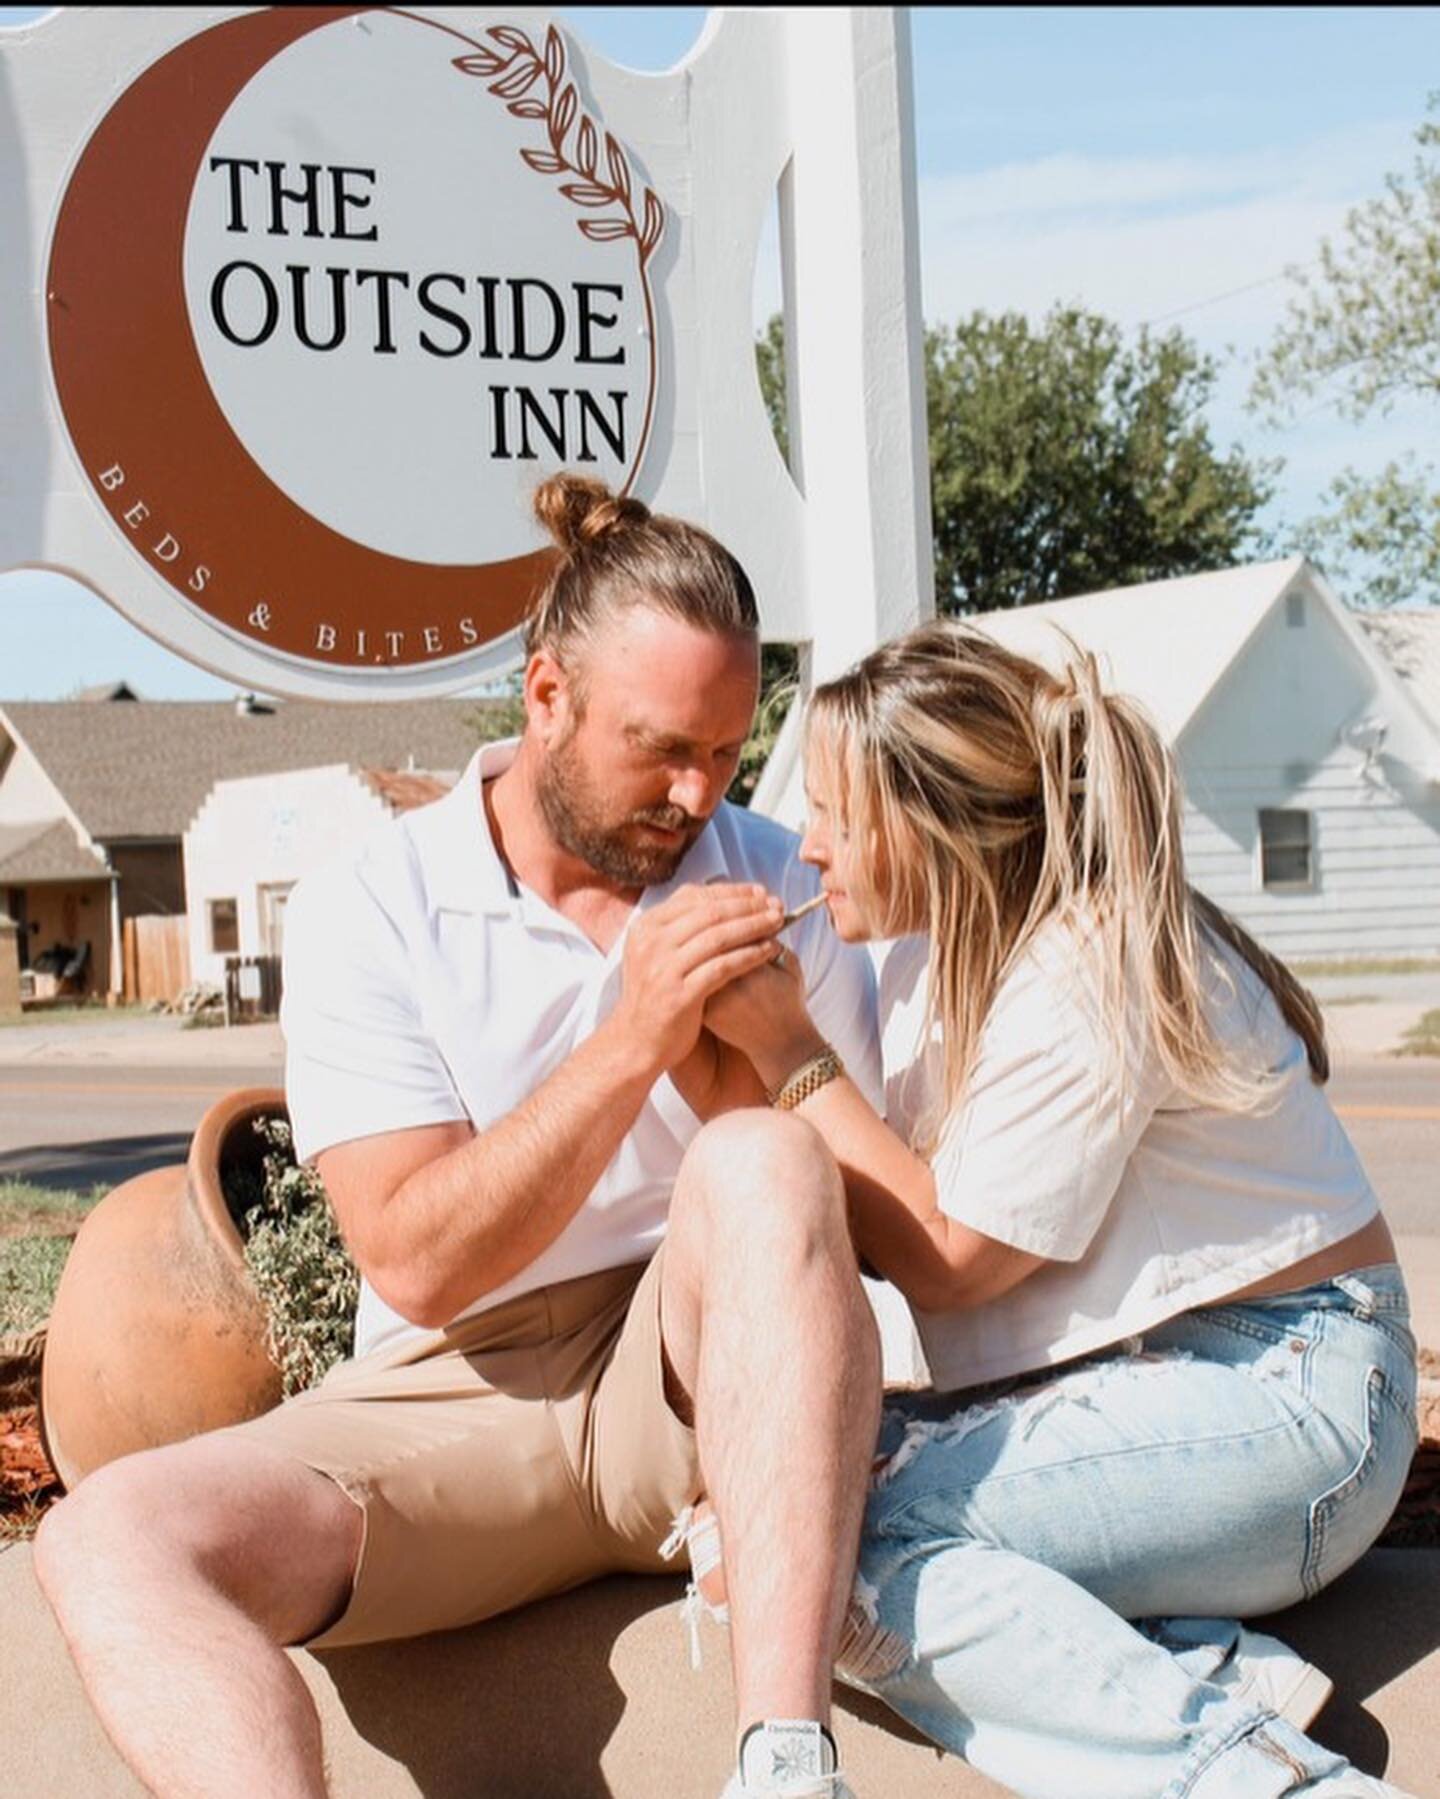 Rollin&rsquo; into wedding week like 😍😍😍
-
-
We can&rsquo;t wait to host this beautiful couple &amp; their joint union!
-
-
Did you know we host private events and are 420 friendly in all outdoor areas? 
www.outsideinnok.com for more info 💚
-
-
?